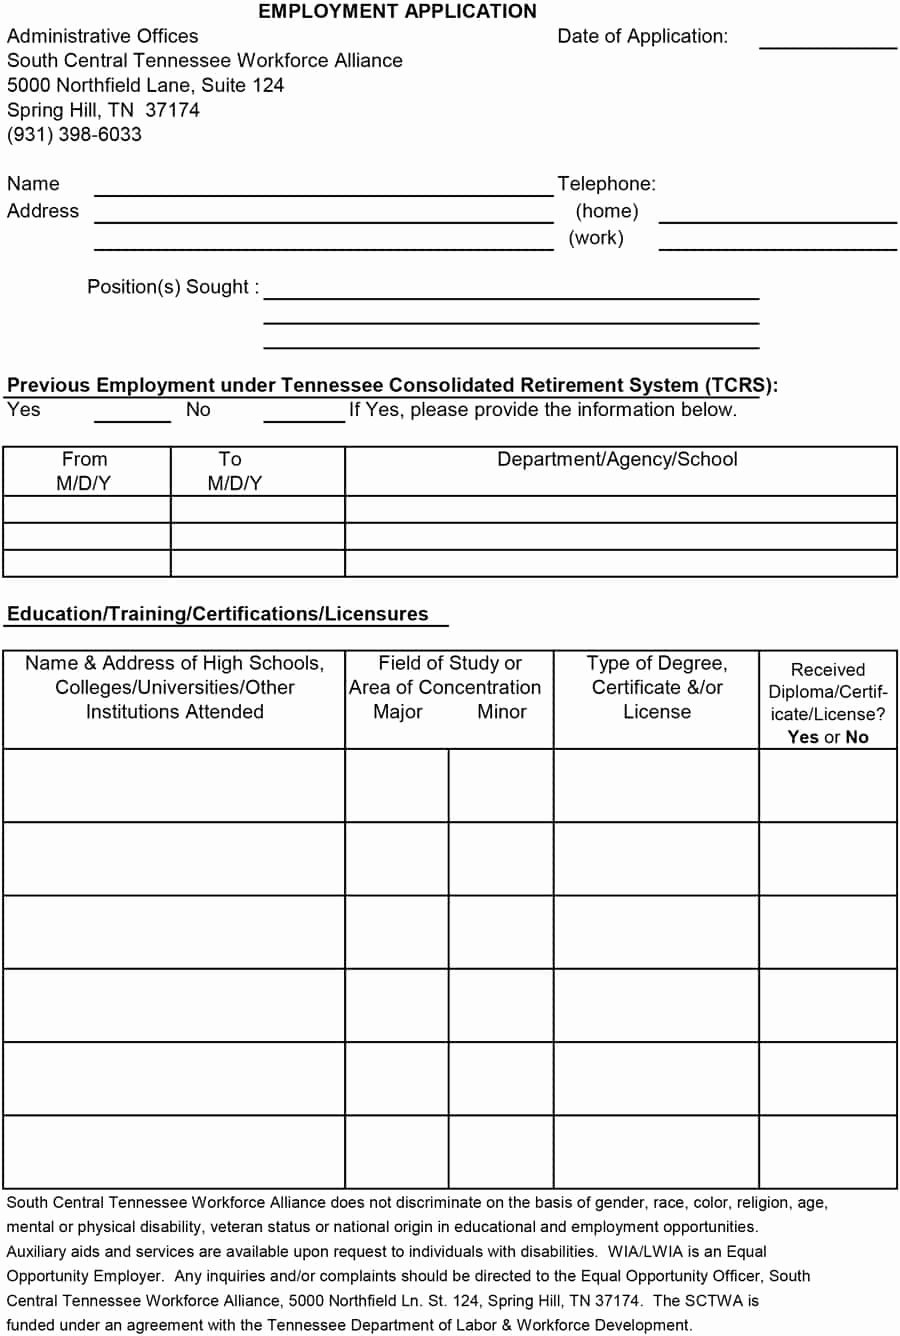 Application for Employment Free Unique 50 Free Employment Job Application form Templates